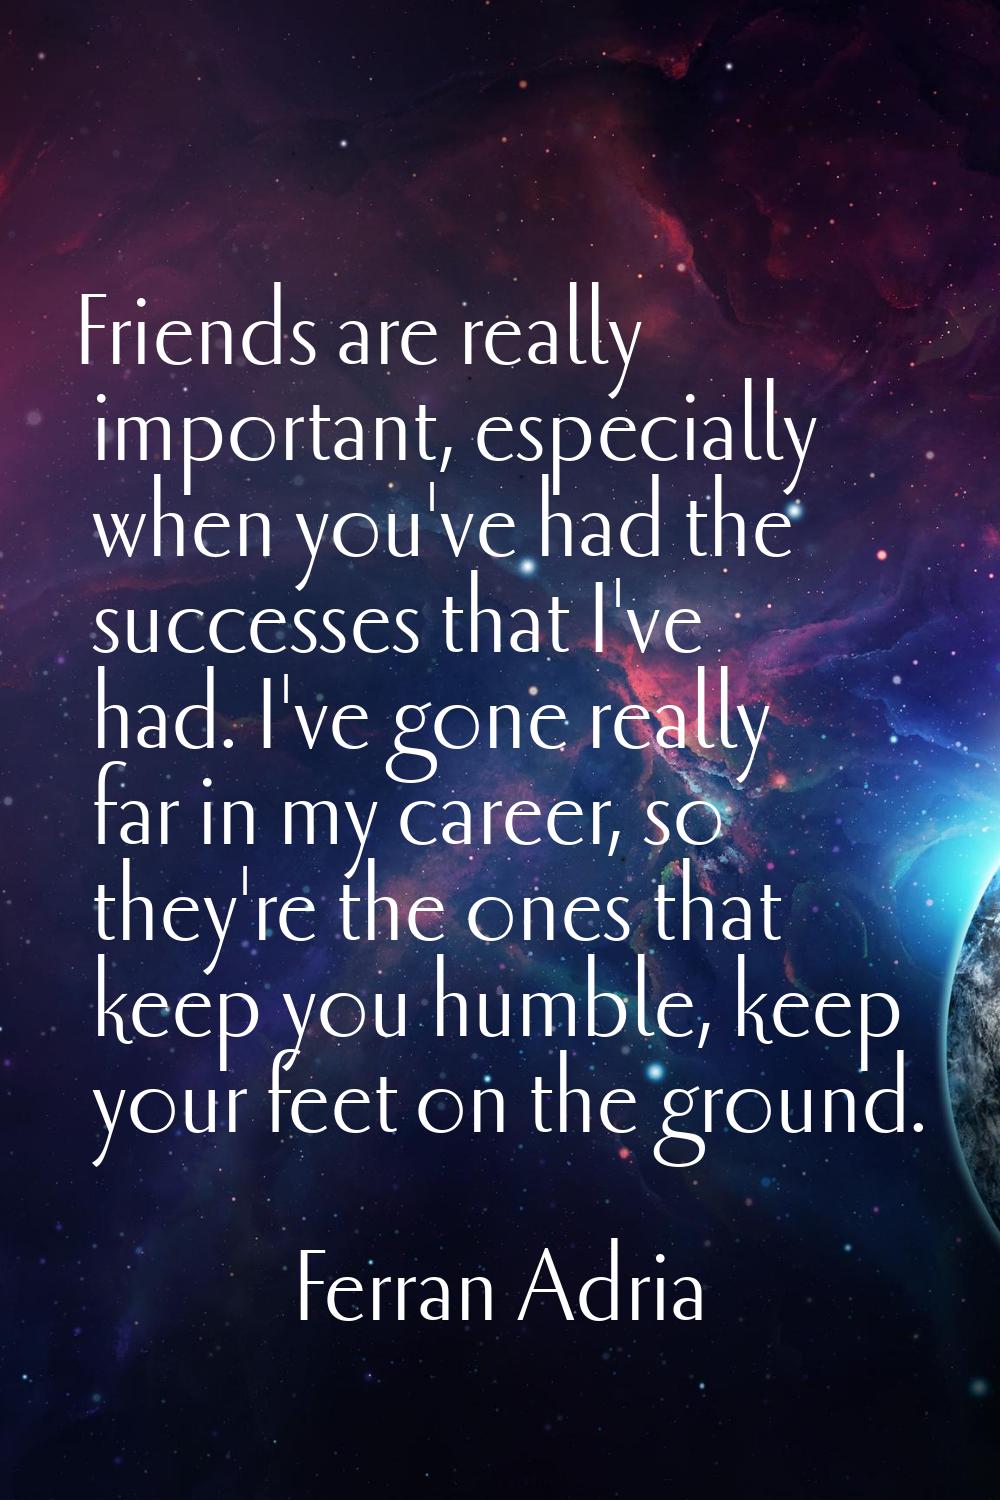 Friends are really important, especially when you've had the successes that I've had. I've gone rea